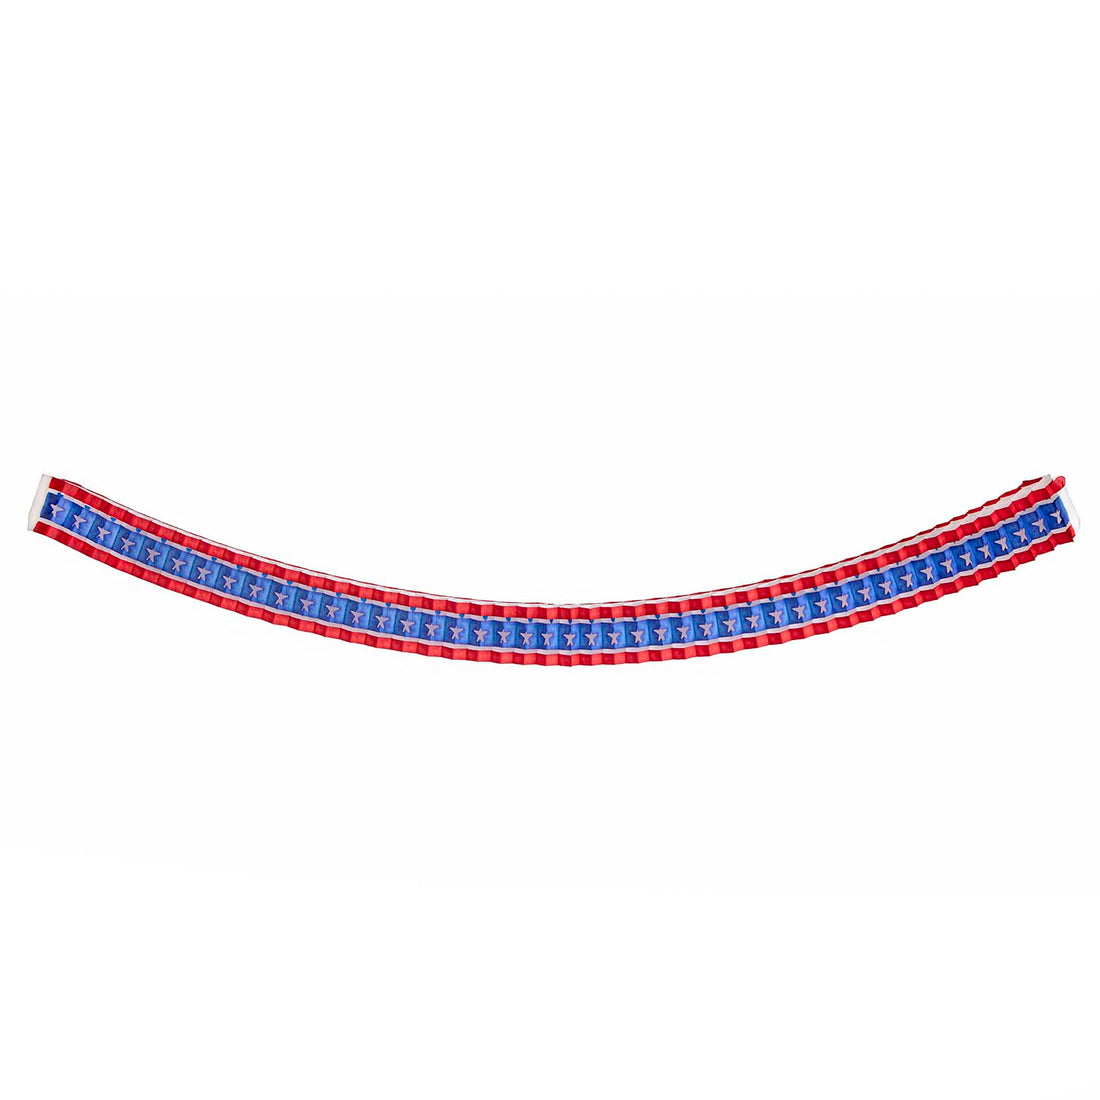 A Hester &amp; Cook Patriotic Star Garland with blue and red stripes on a white background.